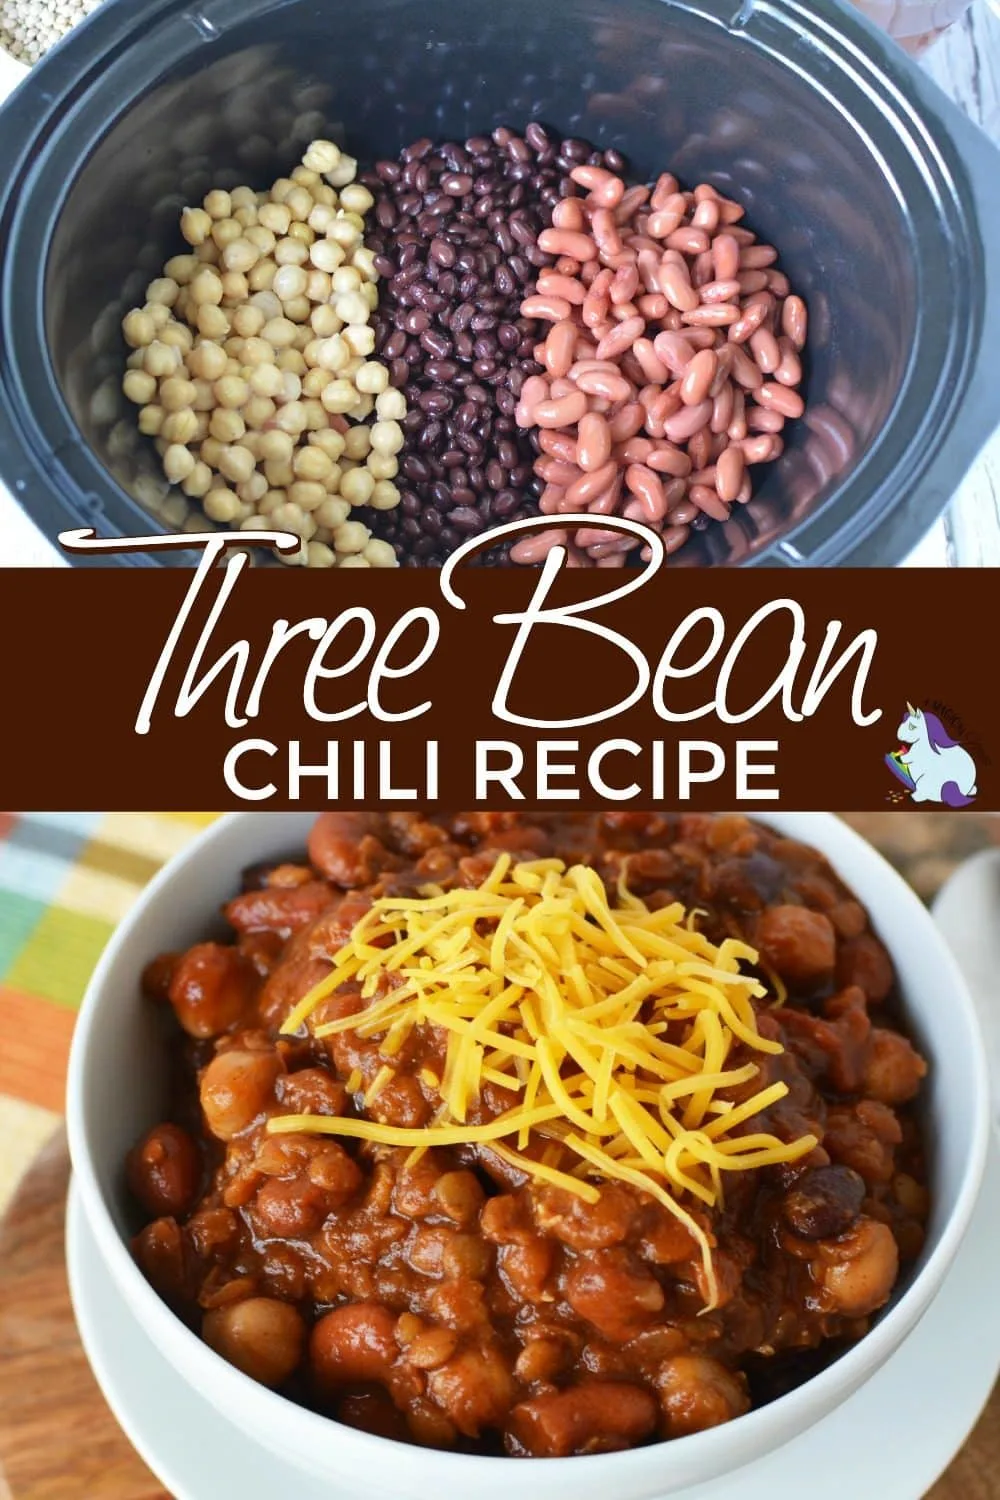 Bowls of chili with beans and topped with shredded cheddar.